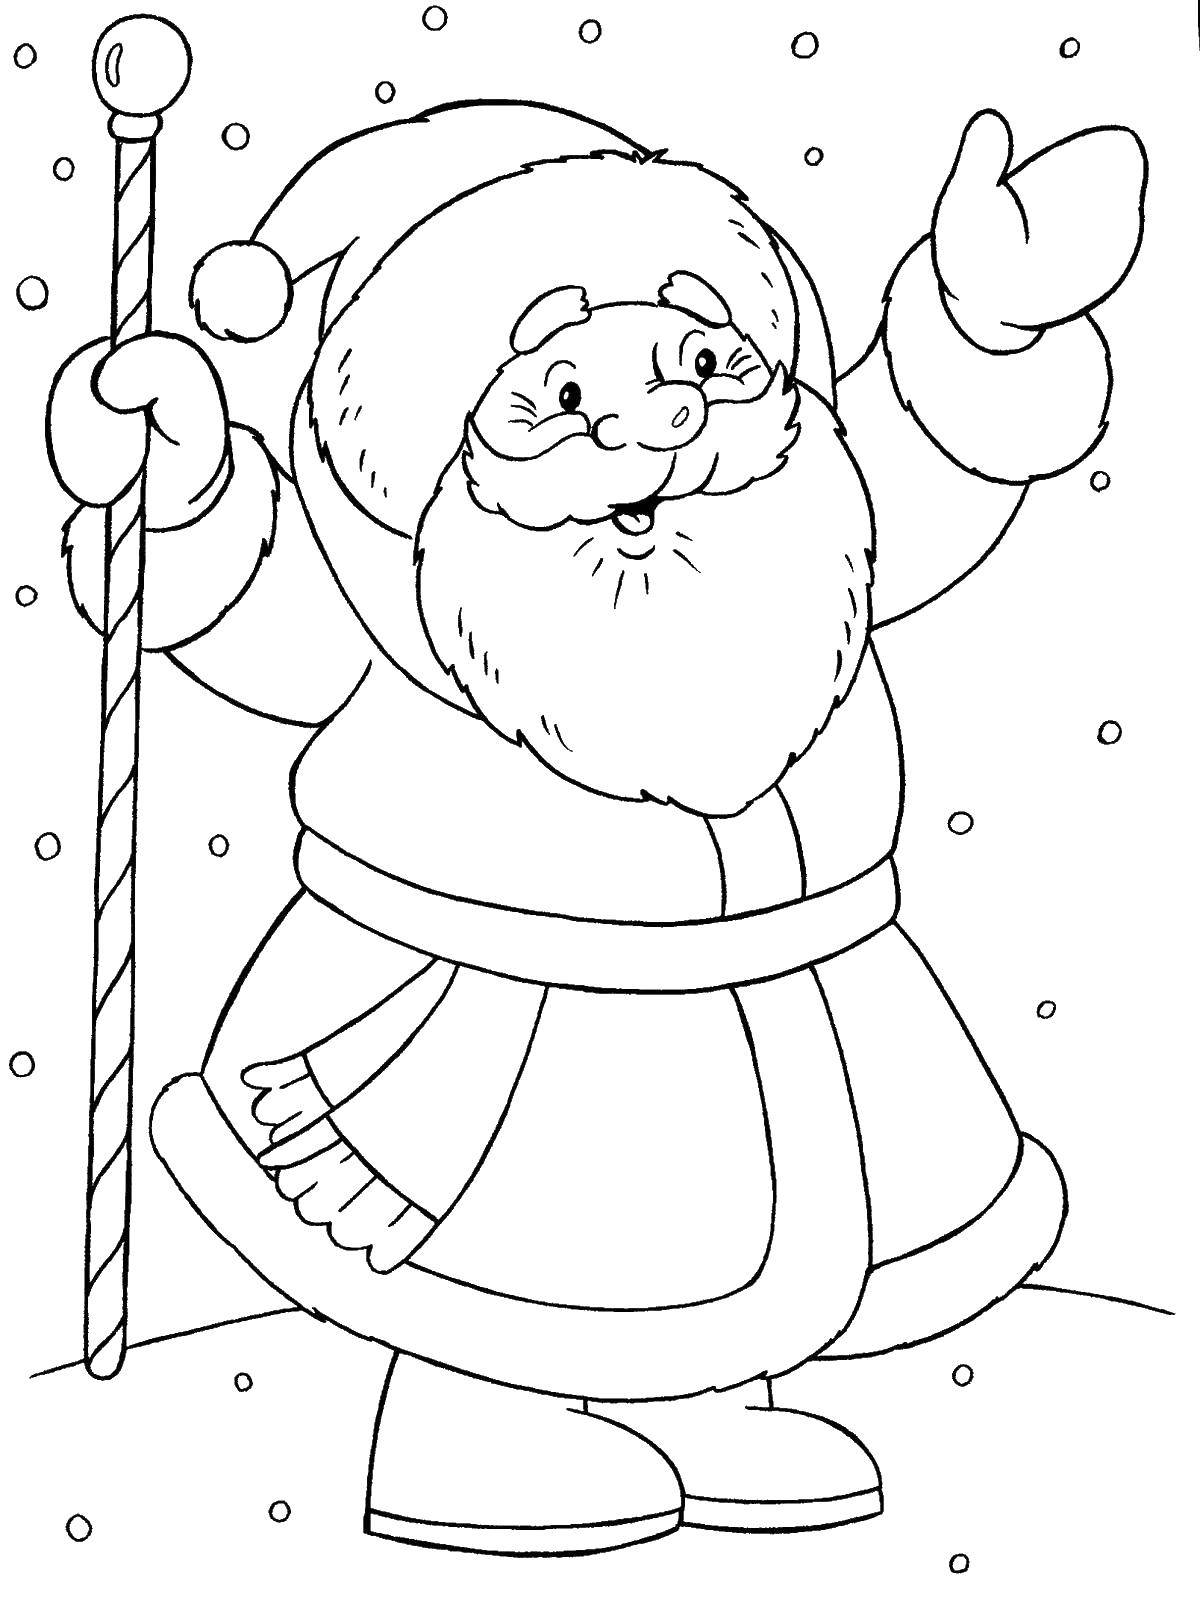 Coloring Santa Claus. Category Coloring pages for kids. Tags:  Santa Claus.